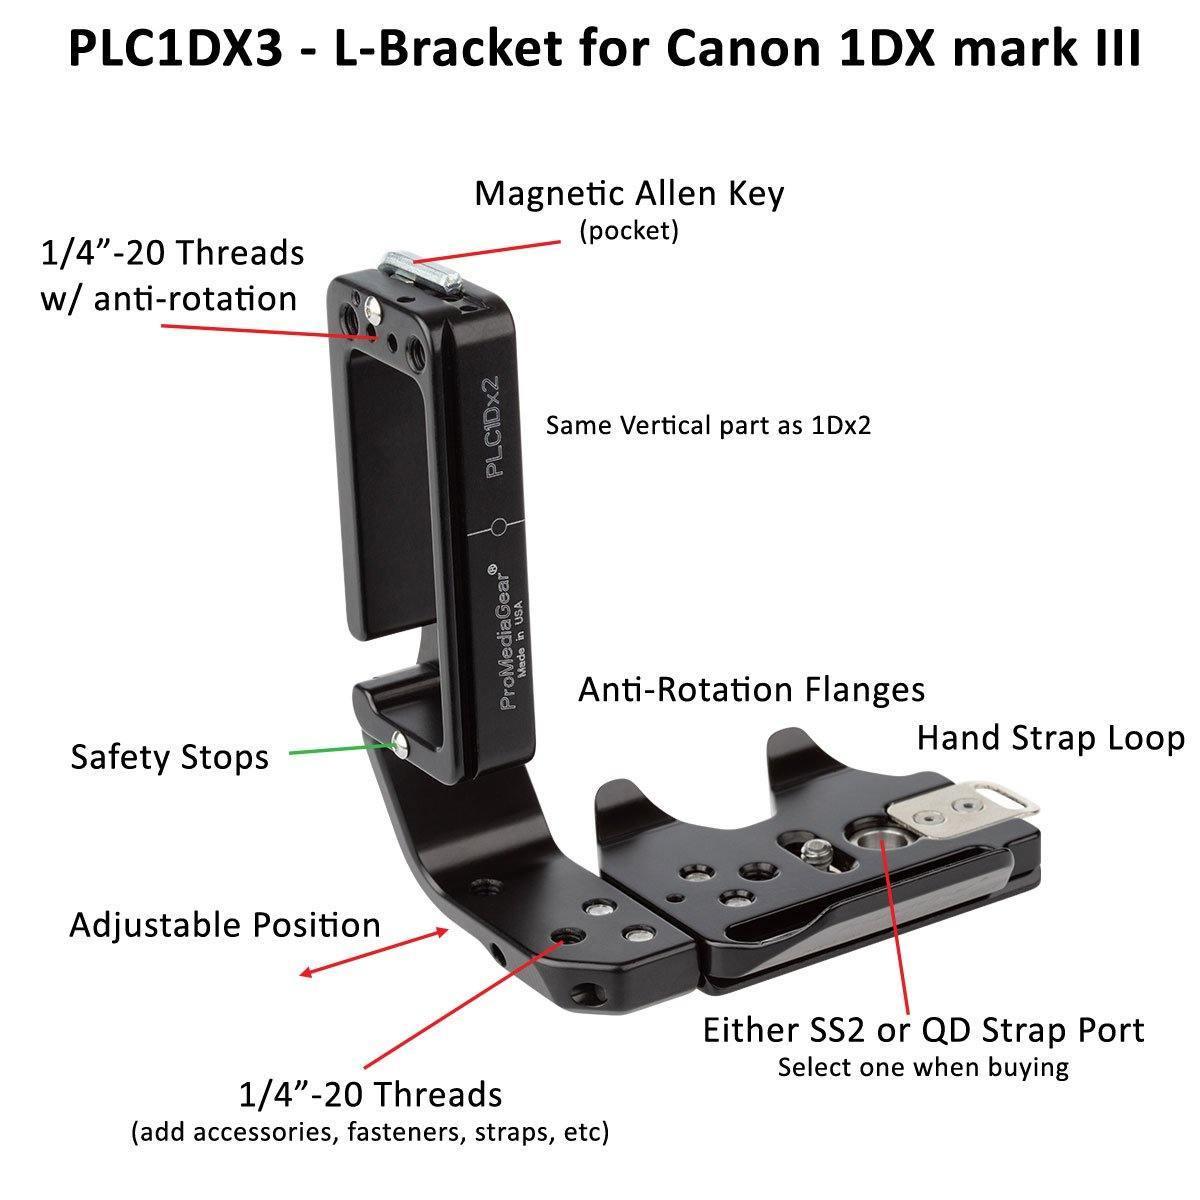 Explanation of the Features Configure with QD or SS2 Strap Port